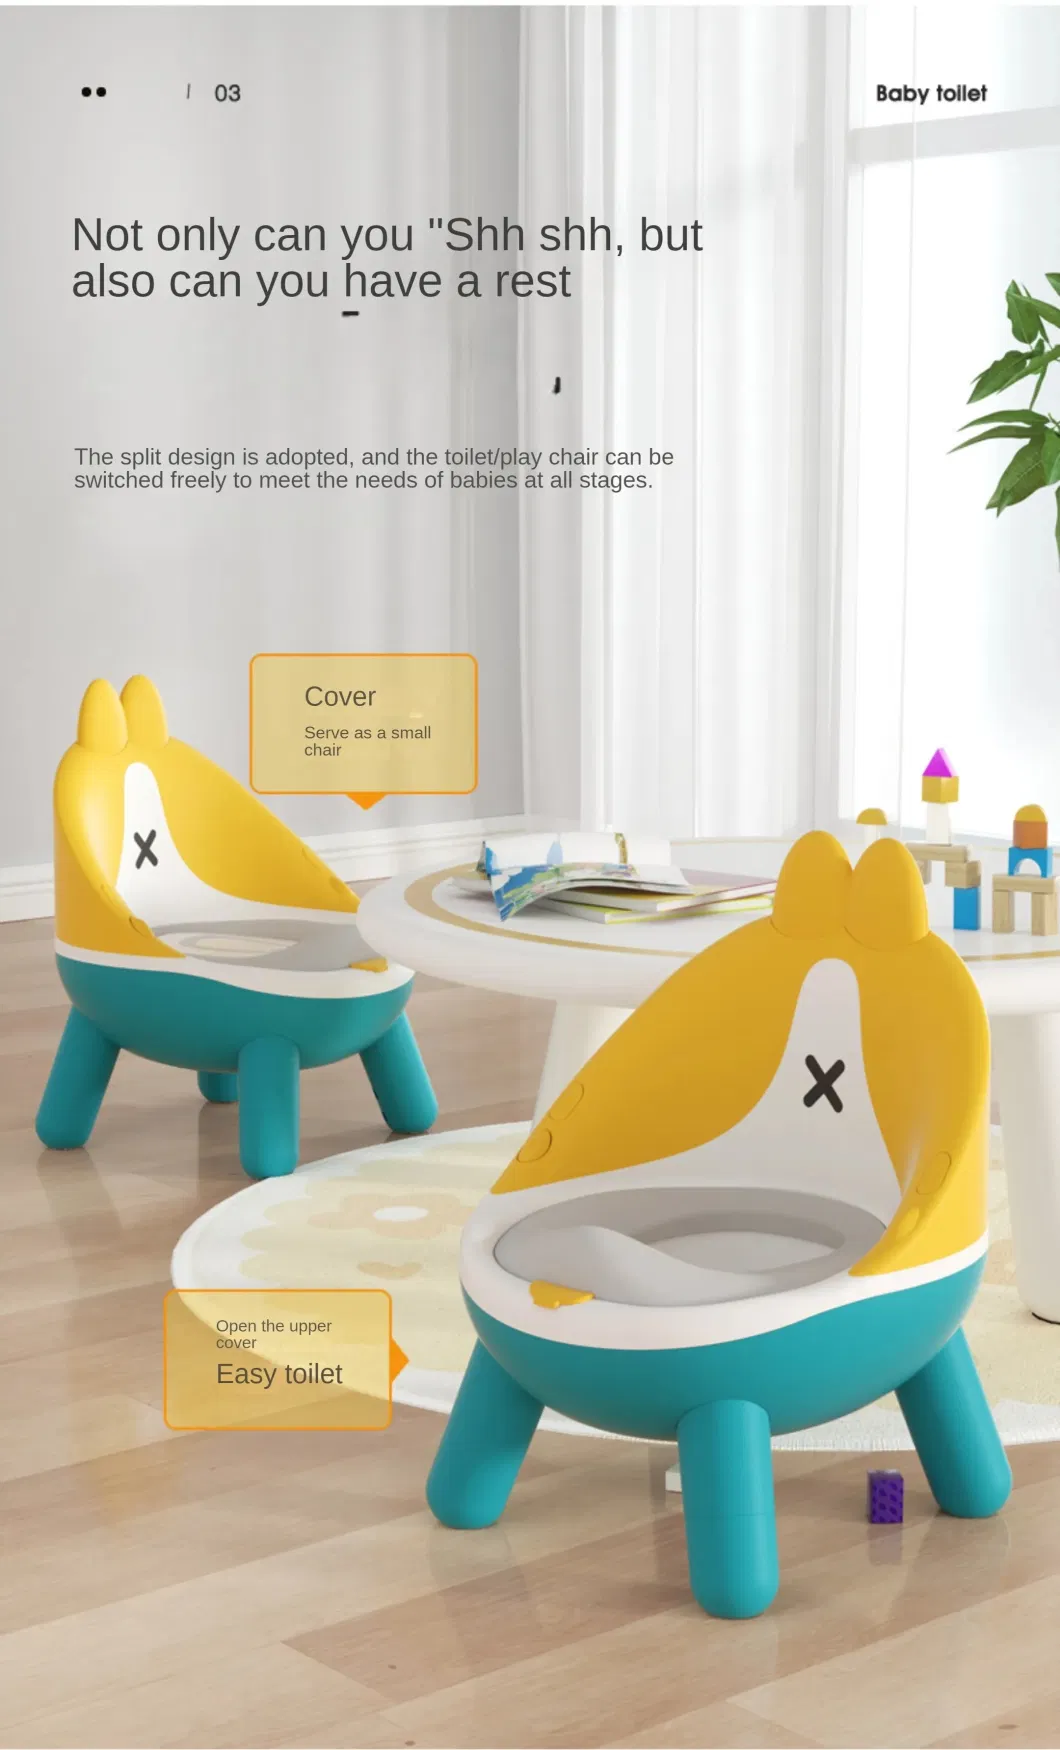 New Kid Toilet Training Seat Portable Plastic Child Indoor Wc Plastic Potty Pot for Kids Baby Safety Potty Training Seat Toilet